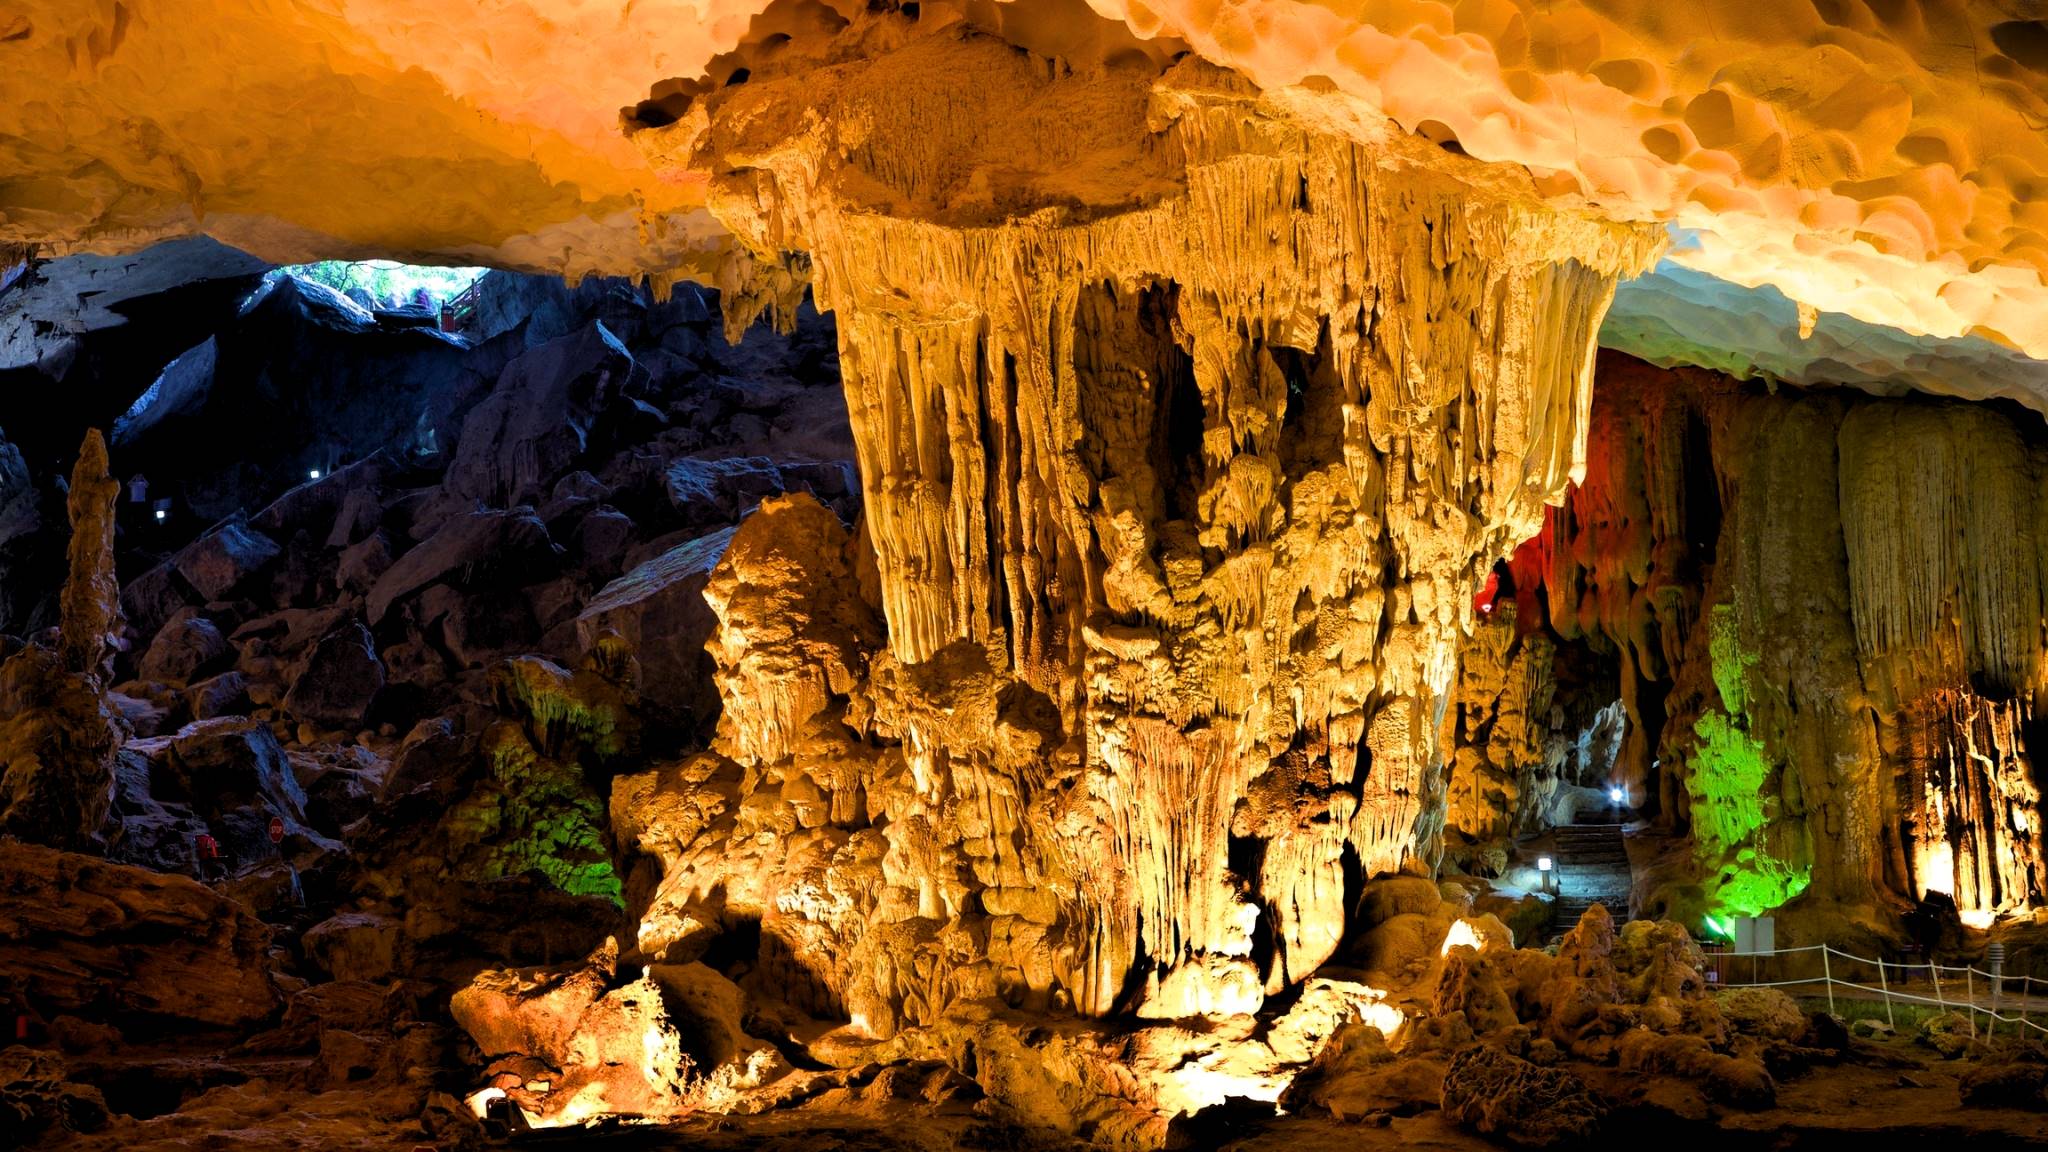 The giant Sung Sot Cave